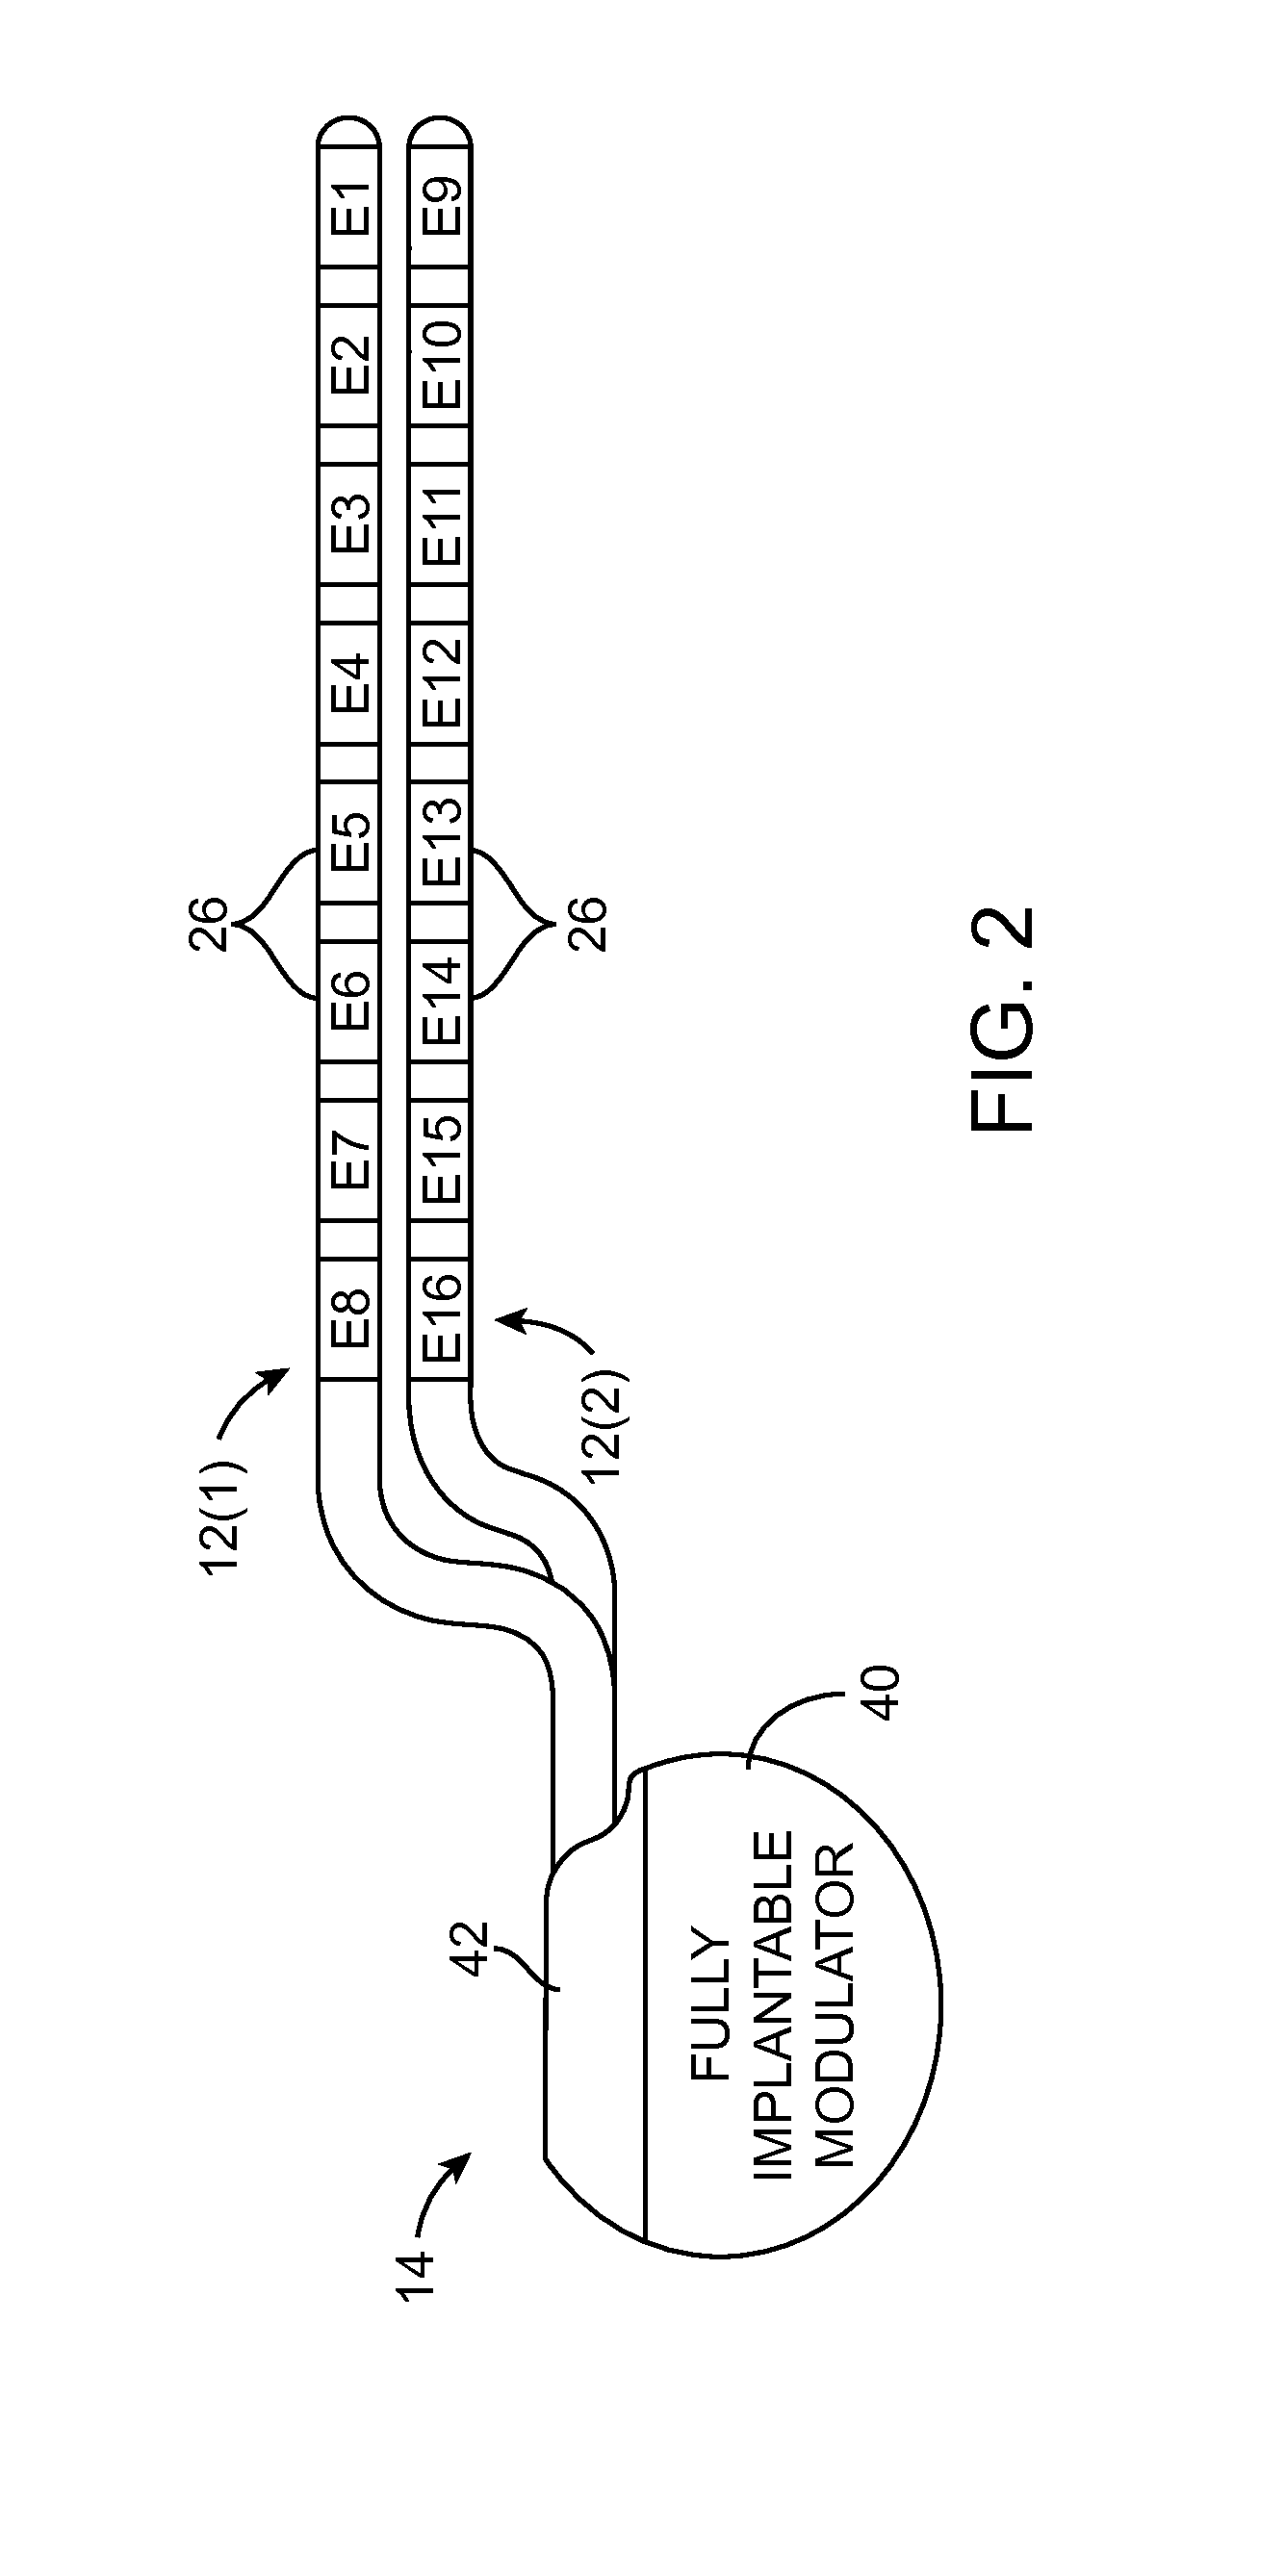 System and method for shaped phased current delivery